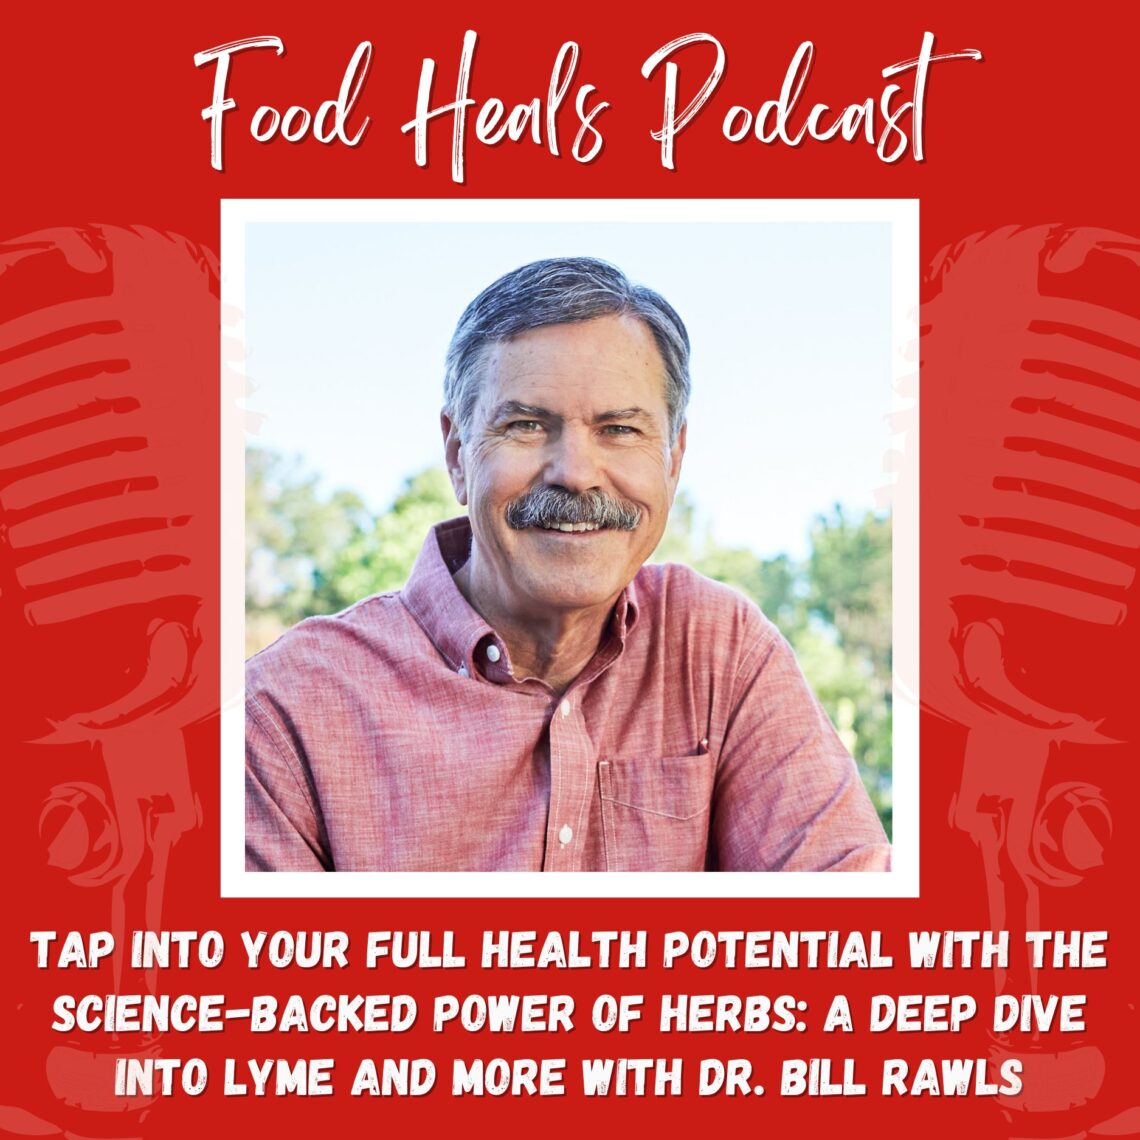 427: Tap Into Your Full Health Potential with the Science-Backed Power of Herbs: A Deep Dive into Lyme and More with Dr. Bill Rawls